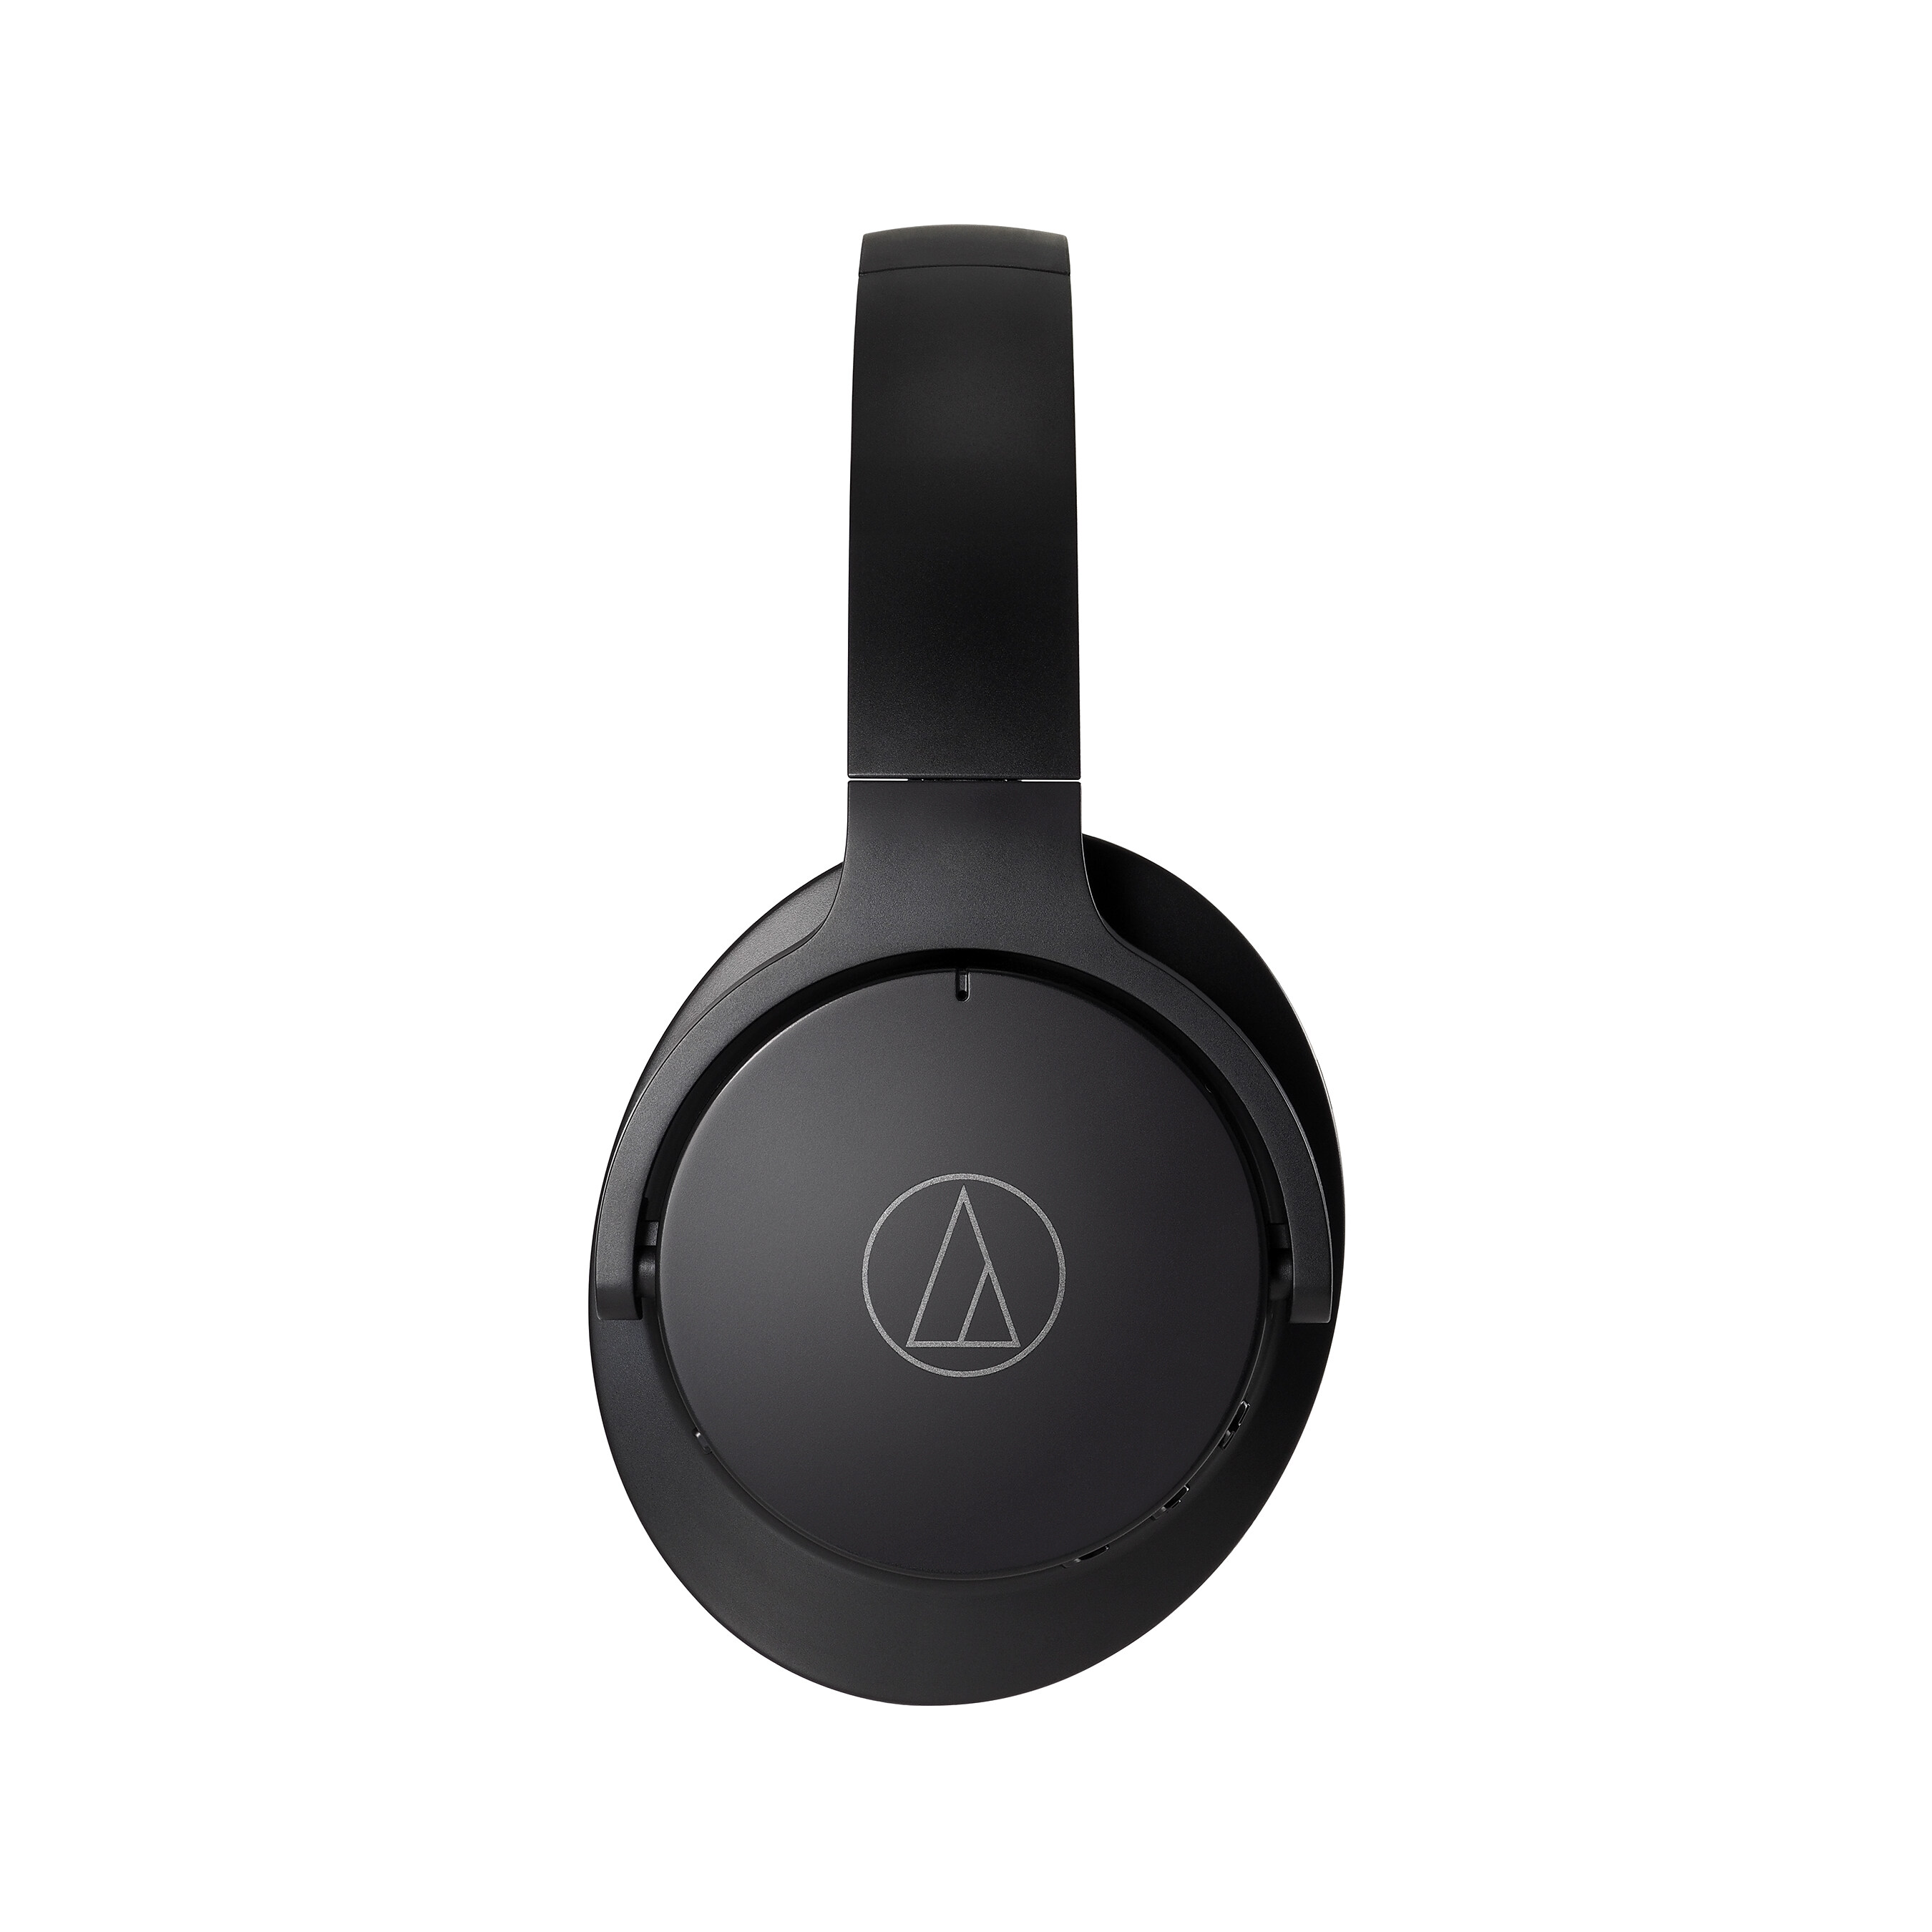 Audio-Technica Wireless Headphones ATH-ANC500BT with Active Noise-Cancelling, 40mm Driver, Bluetooth 4.1, 20 - 20,000 Hz Frequency, 1.2m Length Cable, Gold-Plated 3.5mm Audio Jack, 42 Hours Battery Life